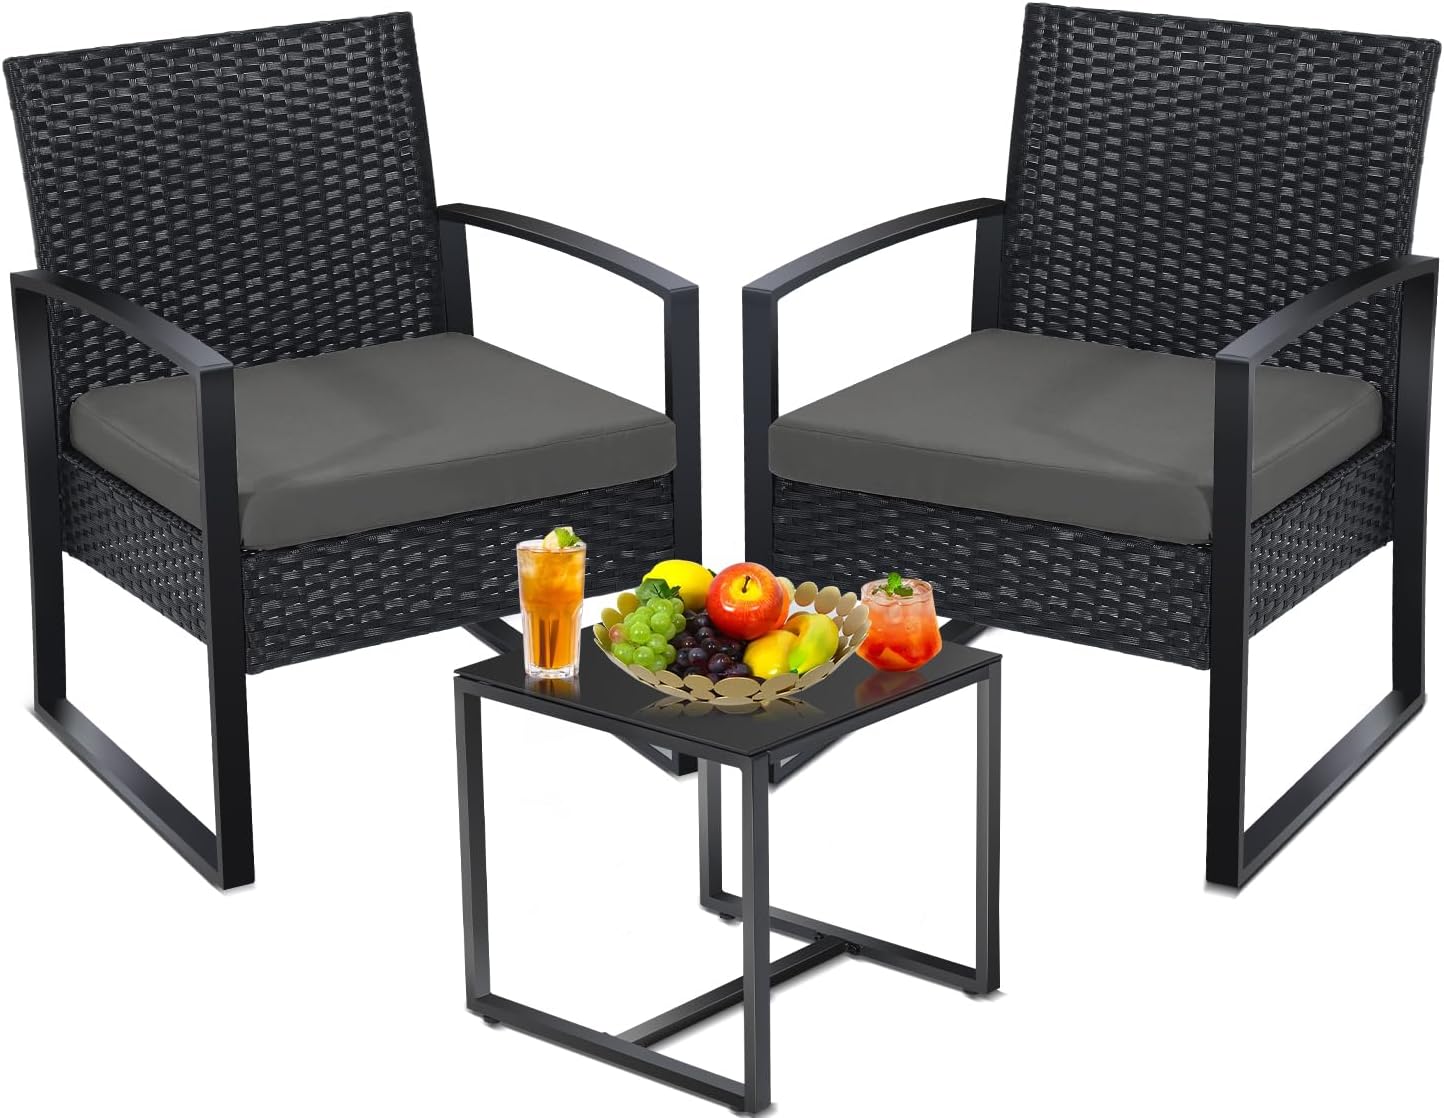 3 Pieces Patio Outdoor Wicker Bistro Furniture Set, Conversation Set, 2 Chairs Plus Table, for Porch, Balcony, Patio, Black Frame with Grey Cushion